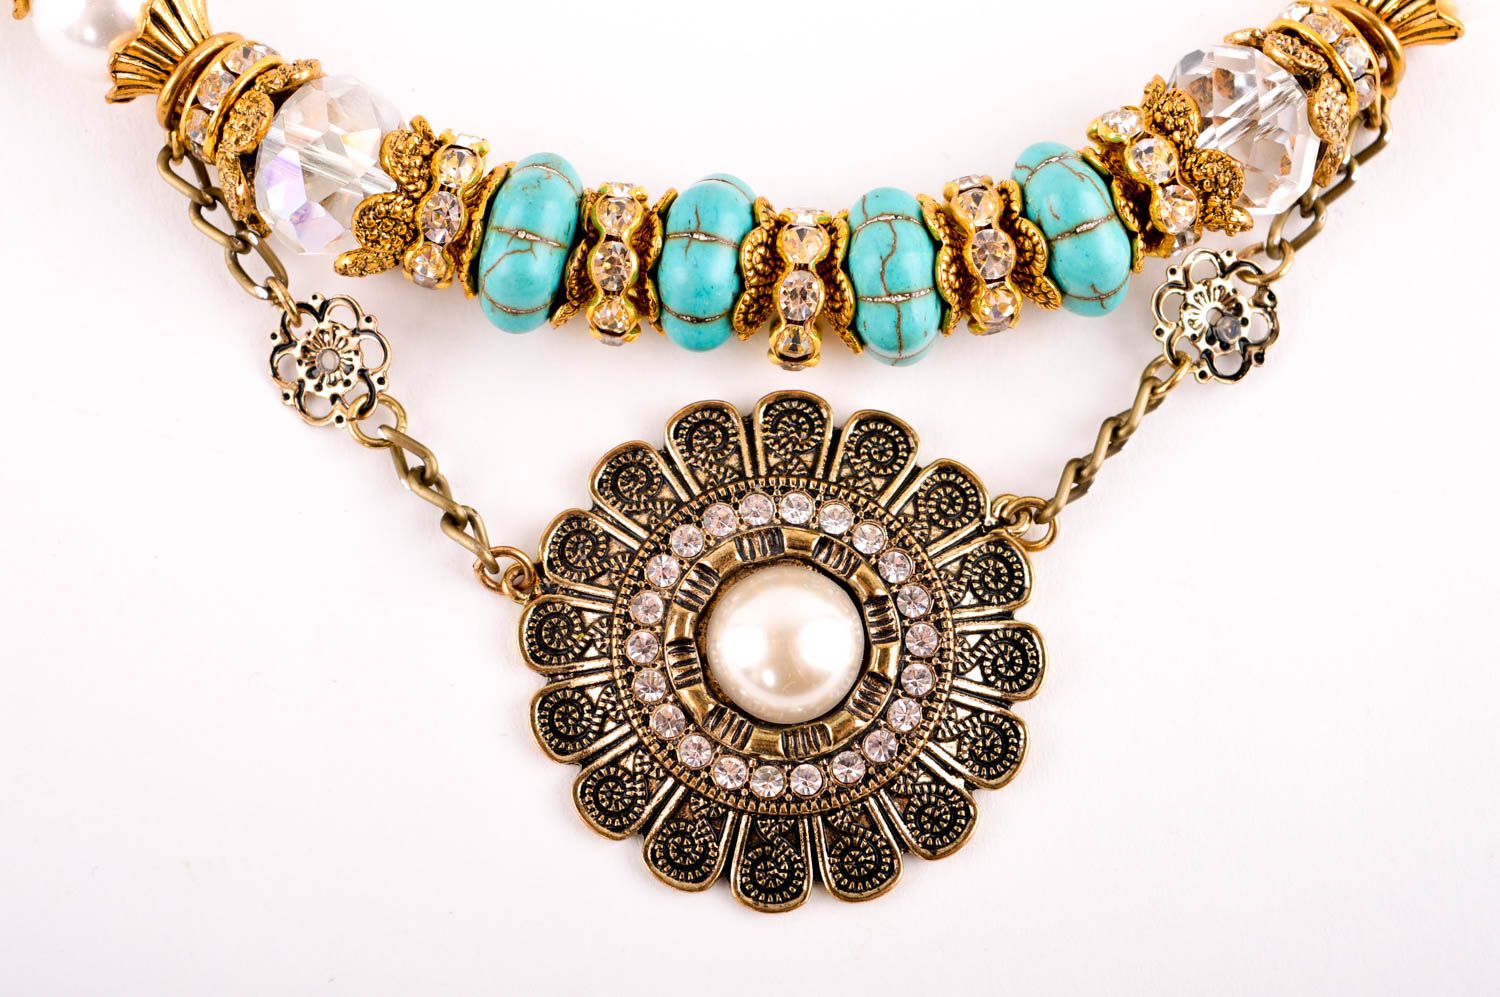 Handmade necklace with stones unusual accessory gift ideas women necklace photo 3